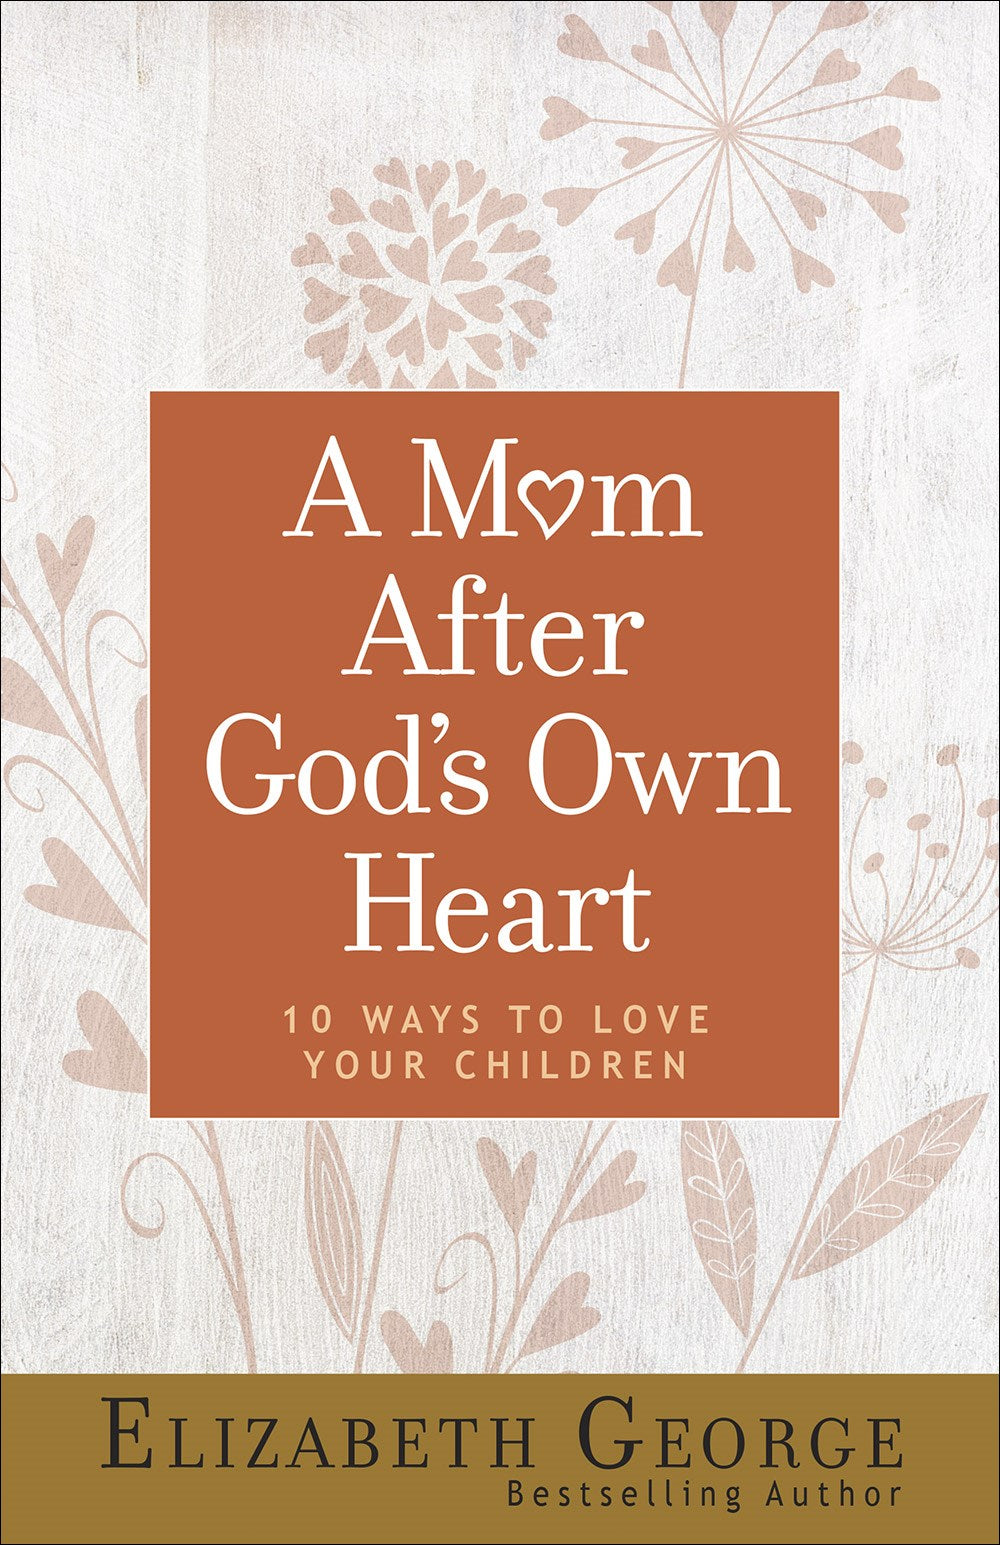 Seed of Abraham Christian Bookstore - Elizabeth George - A Mom After God&